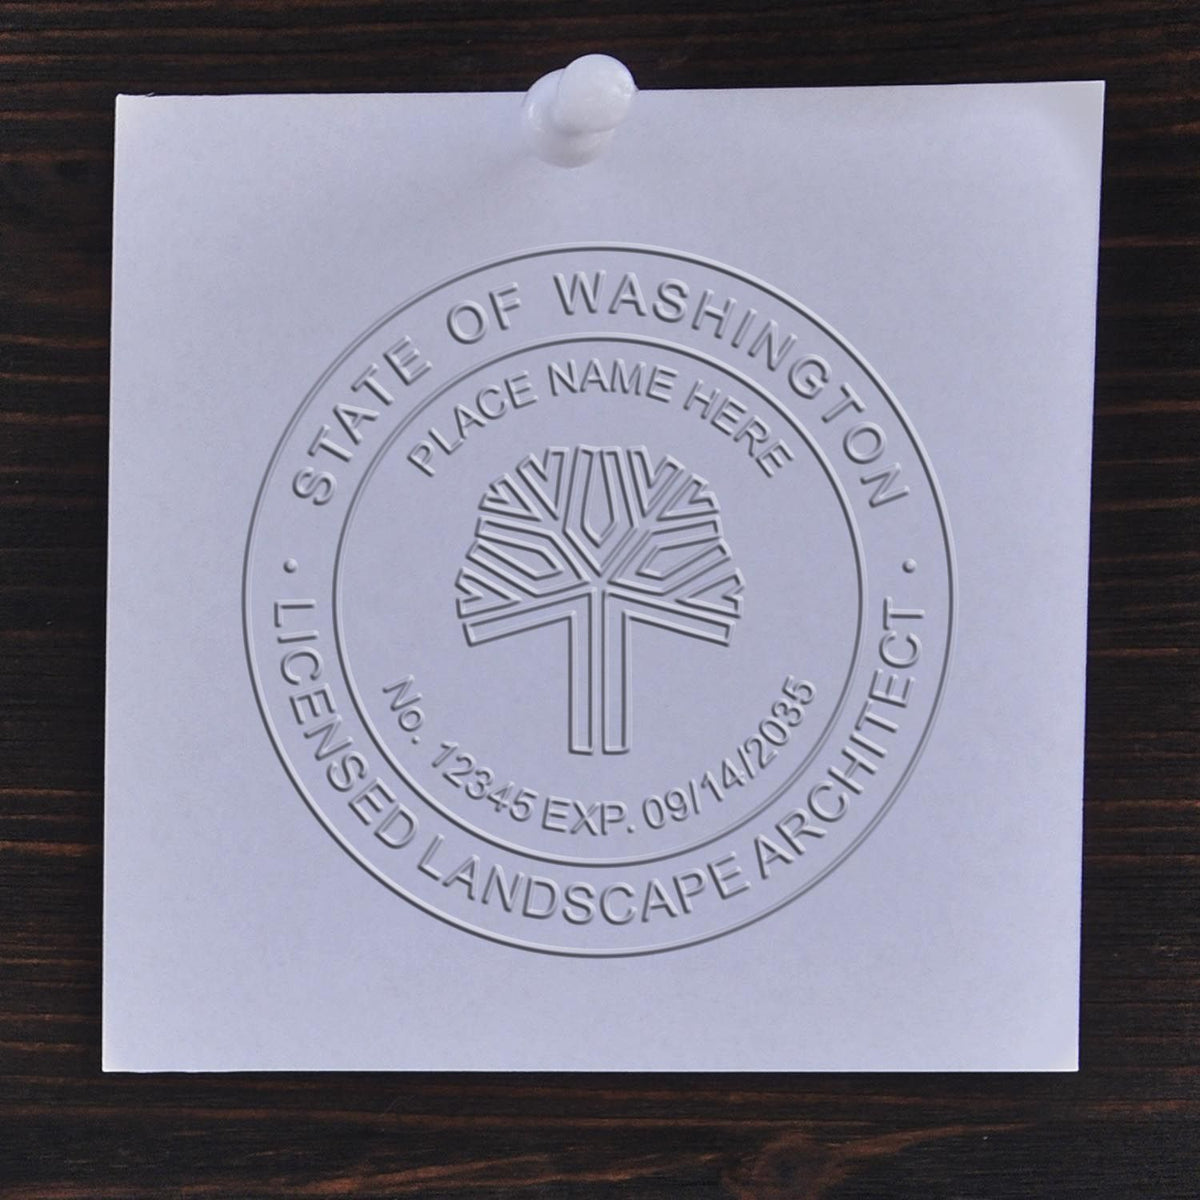 An in use photo of the Hybrid Washington Landscape Architect Seal showing a sample imprint on a cardstock